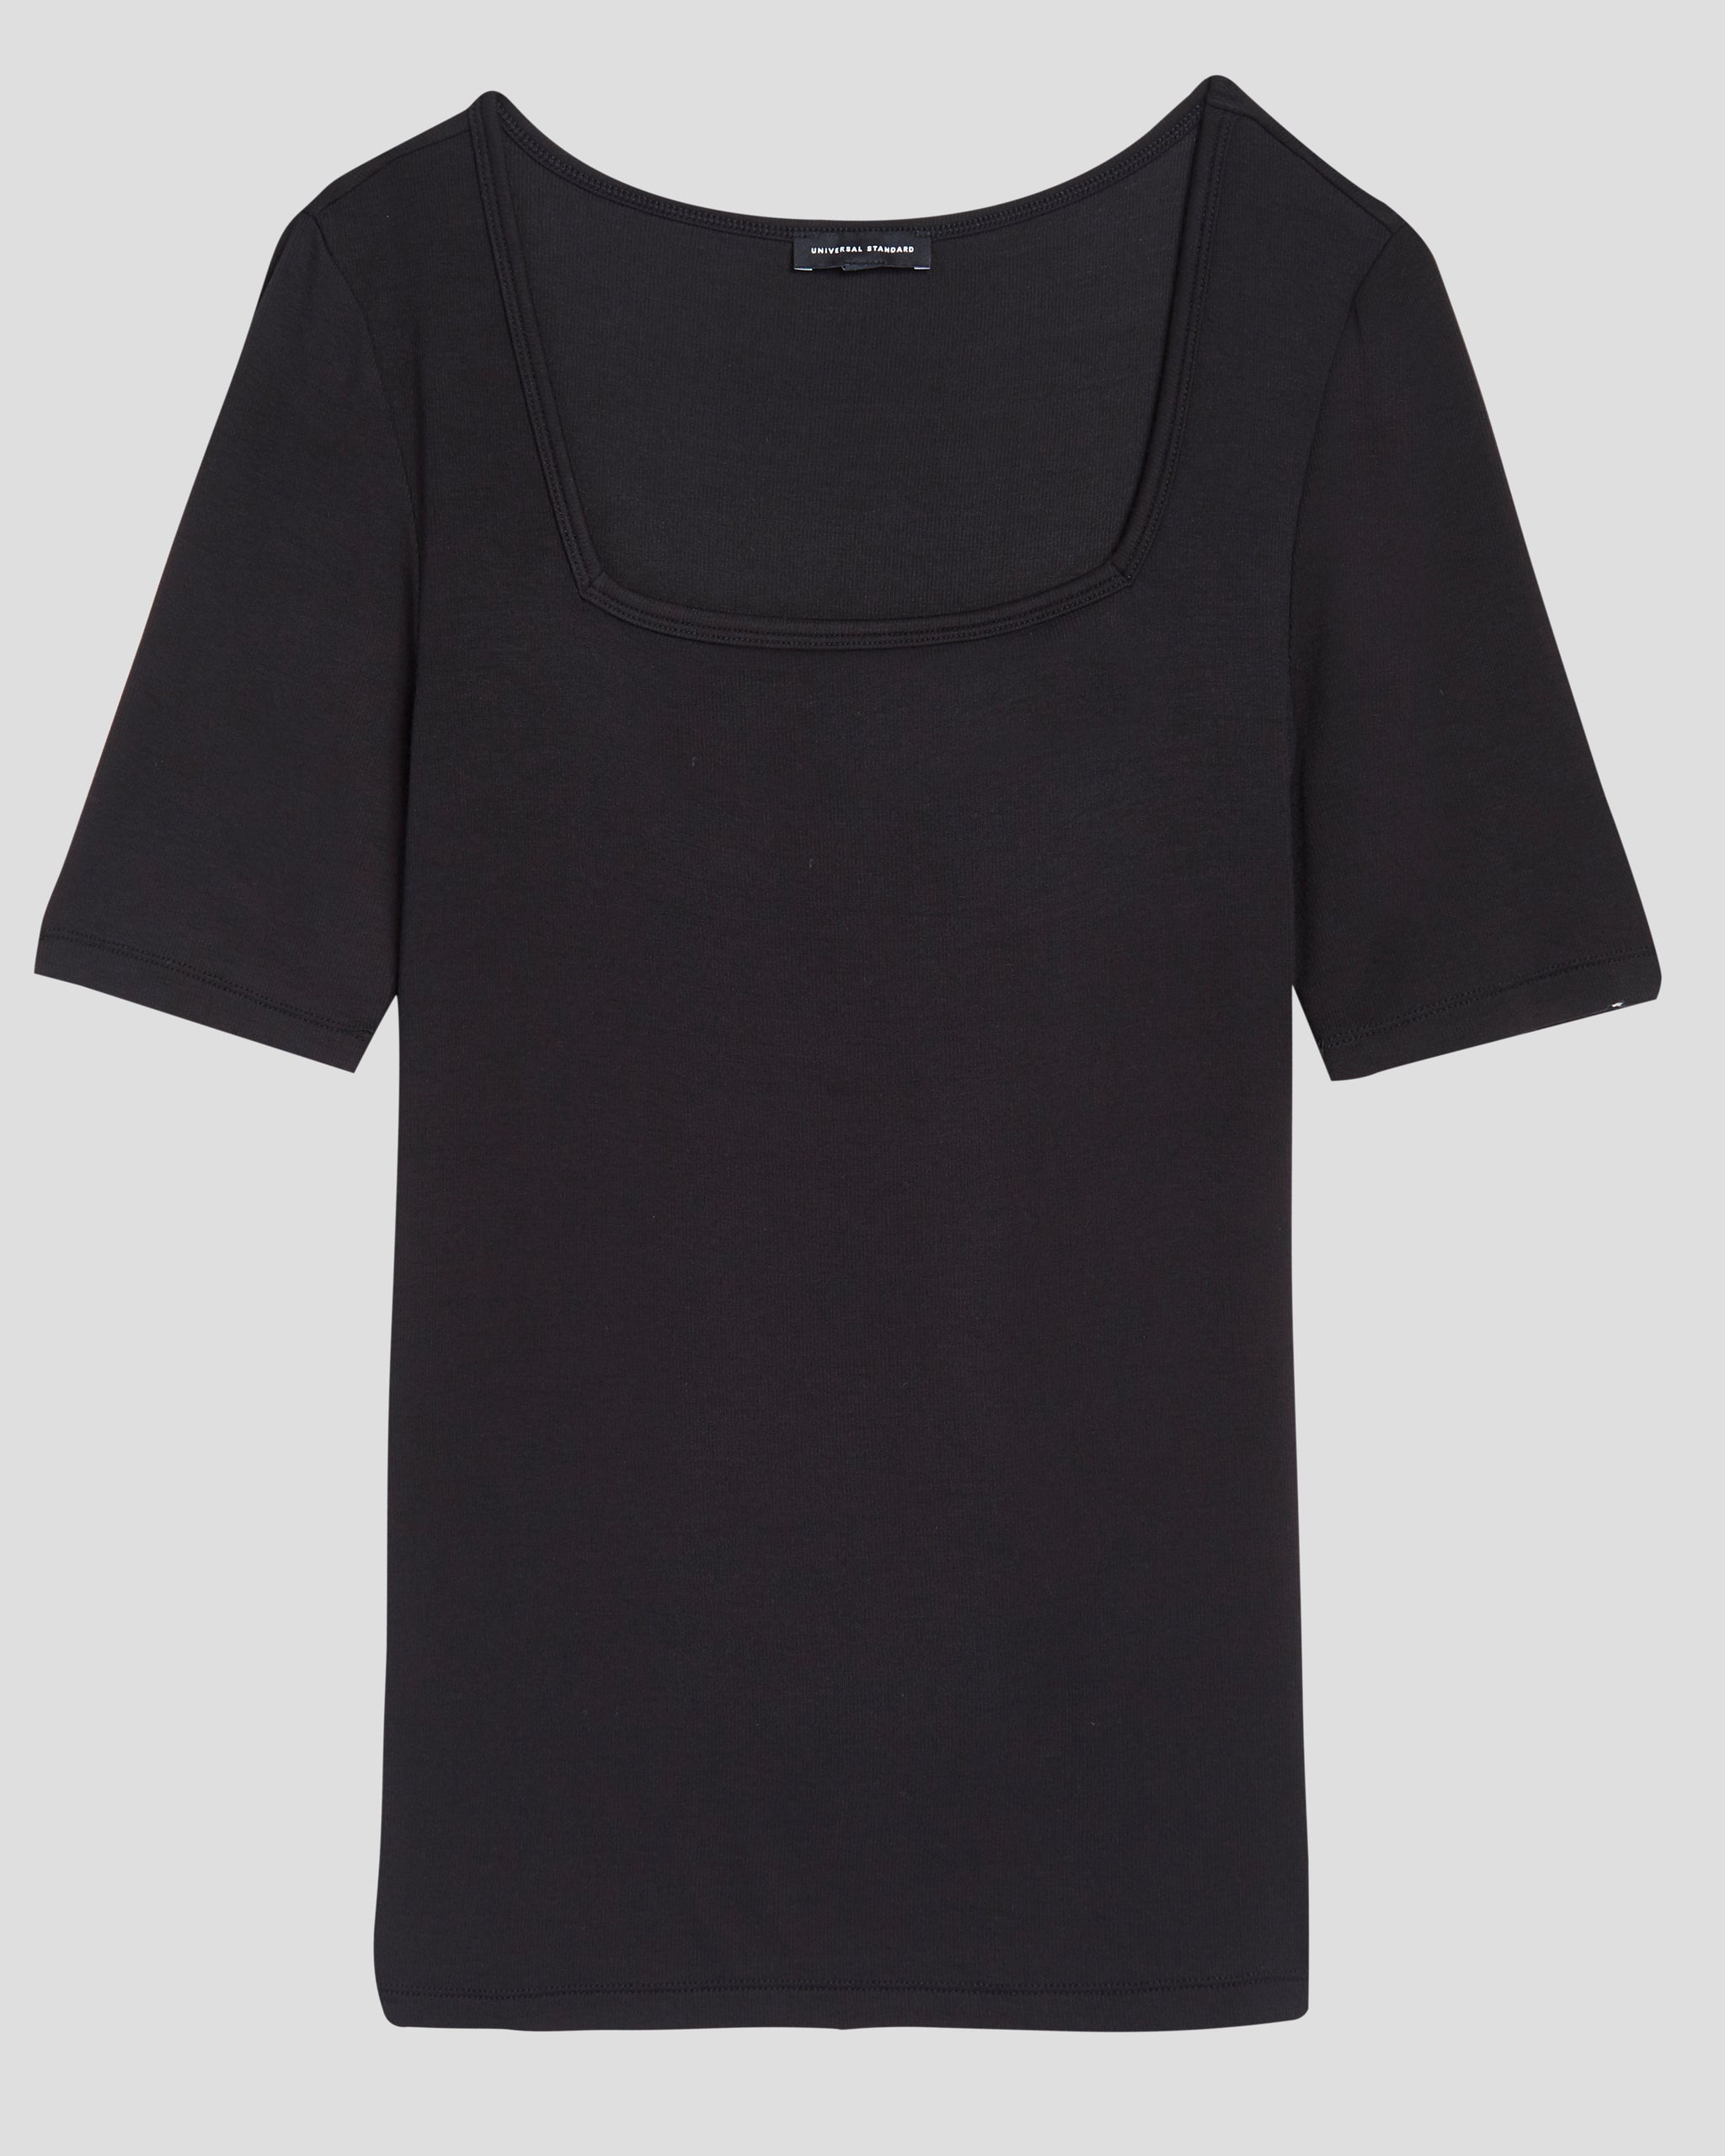 Contrast Trim Square Neck Short Sleeve Tee, T-Shirts